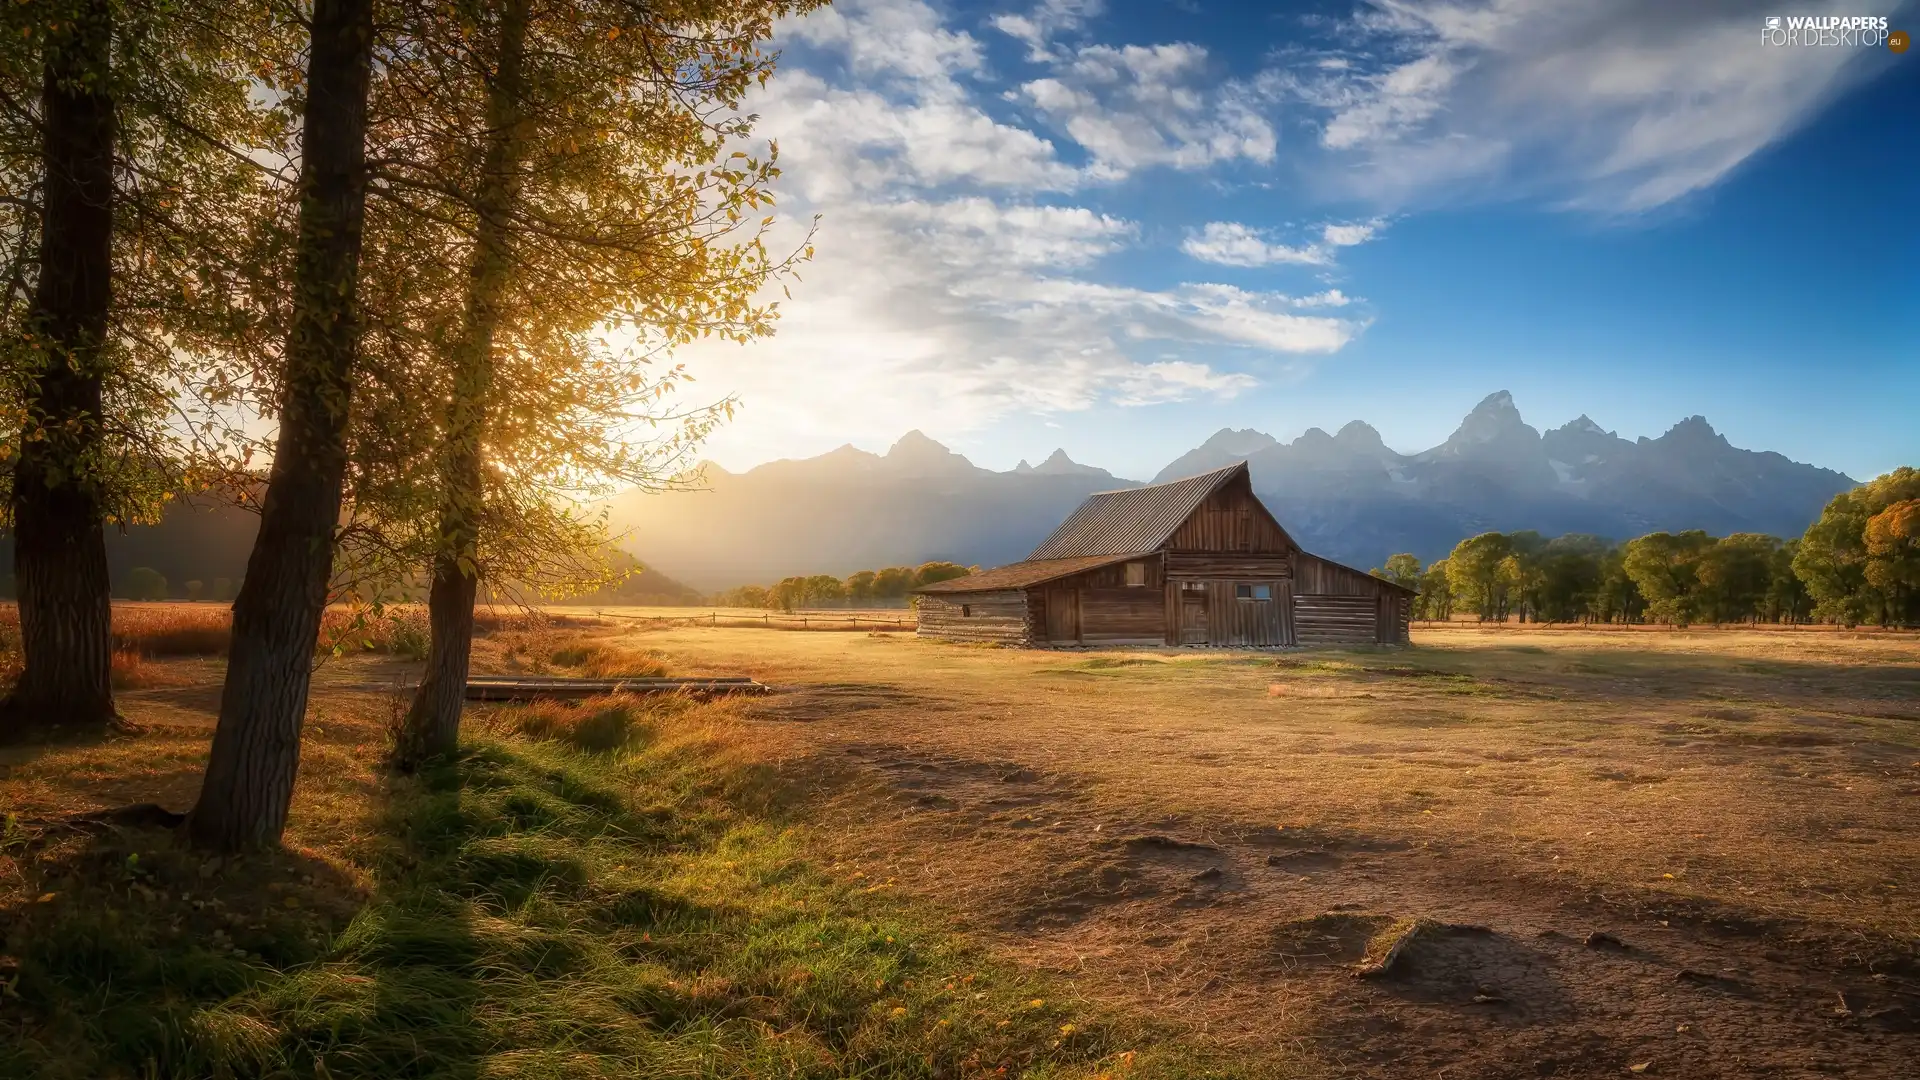 Sunrise, Mountains, Barn, State of Wyoming, trees, Grand Teton National Park, house, The United States, clouds, viewes